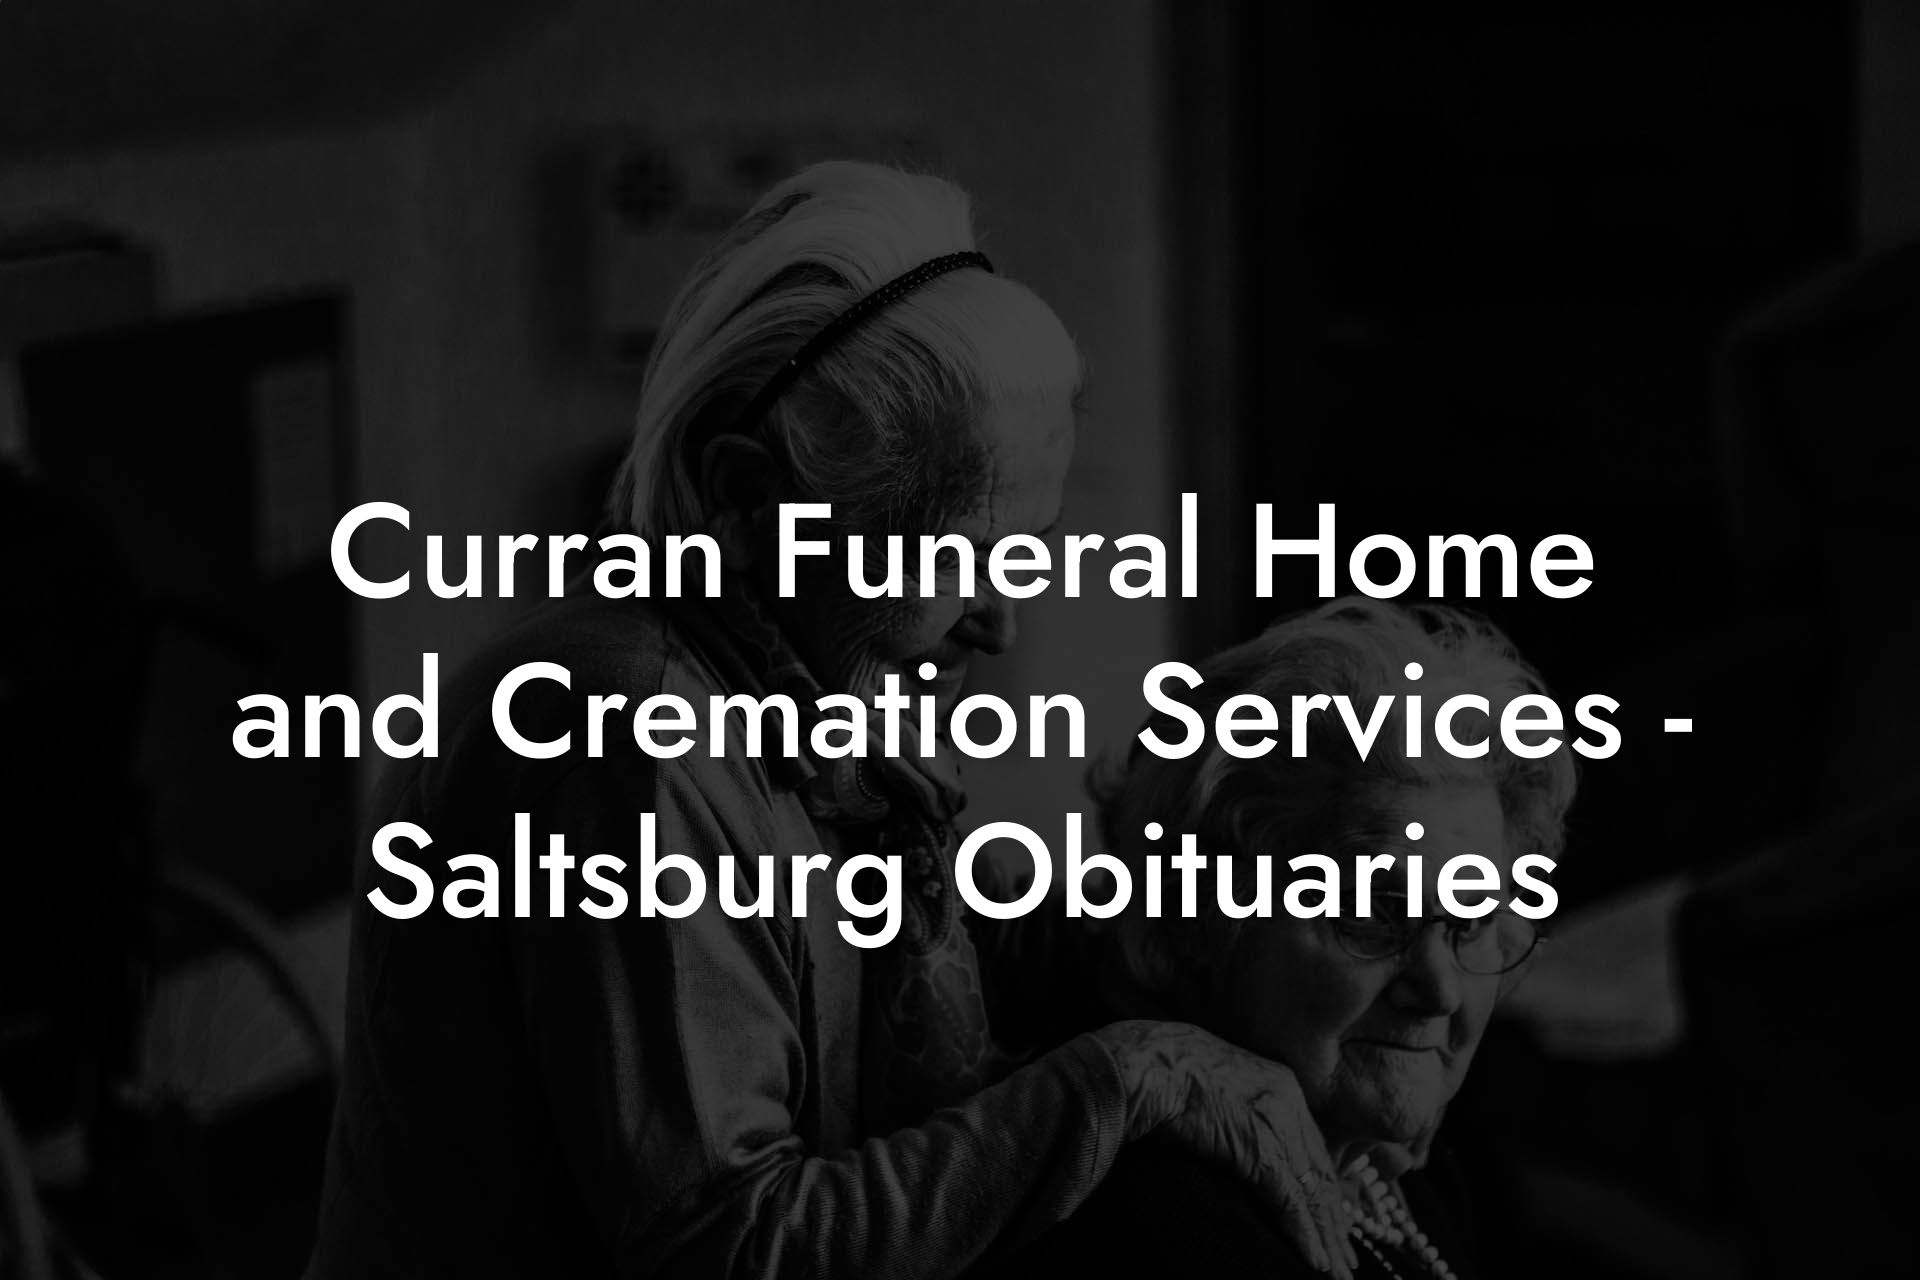 Curran Funeral Home and Cremation Services - Saltsburg Obituaries